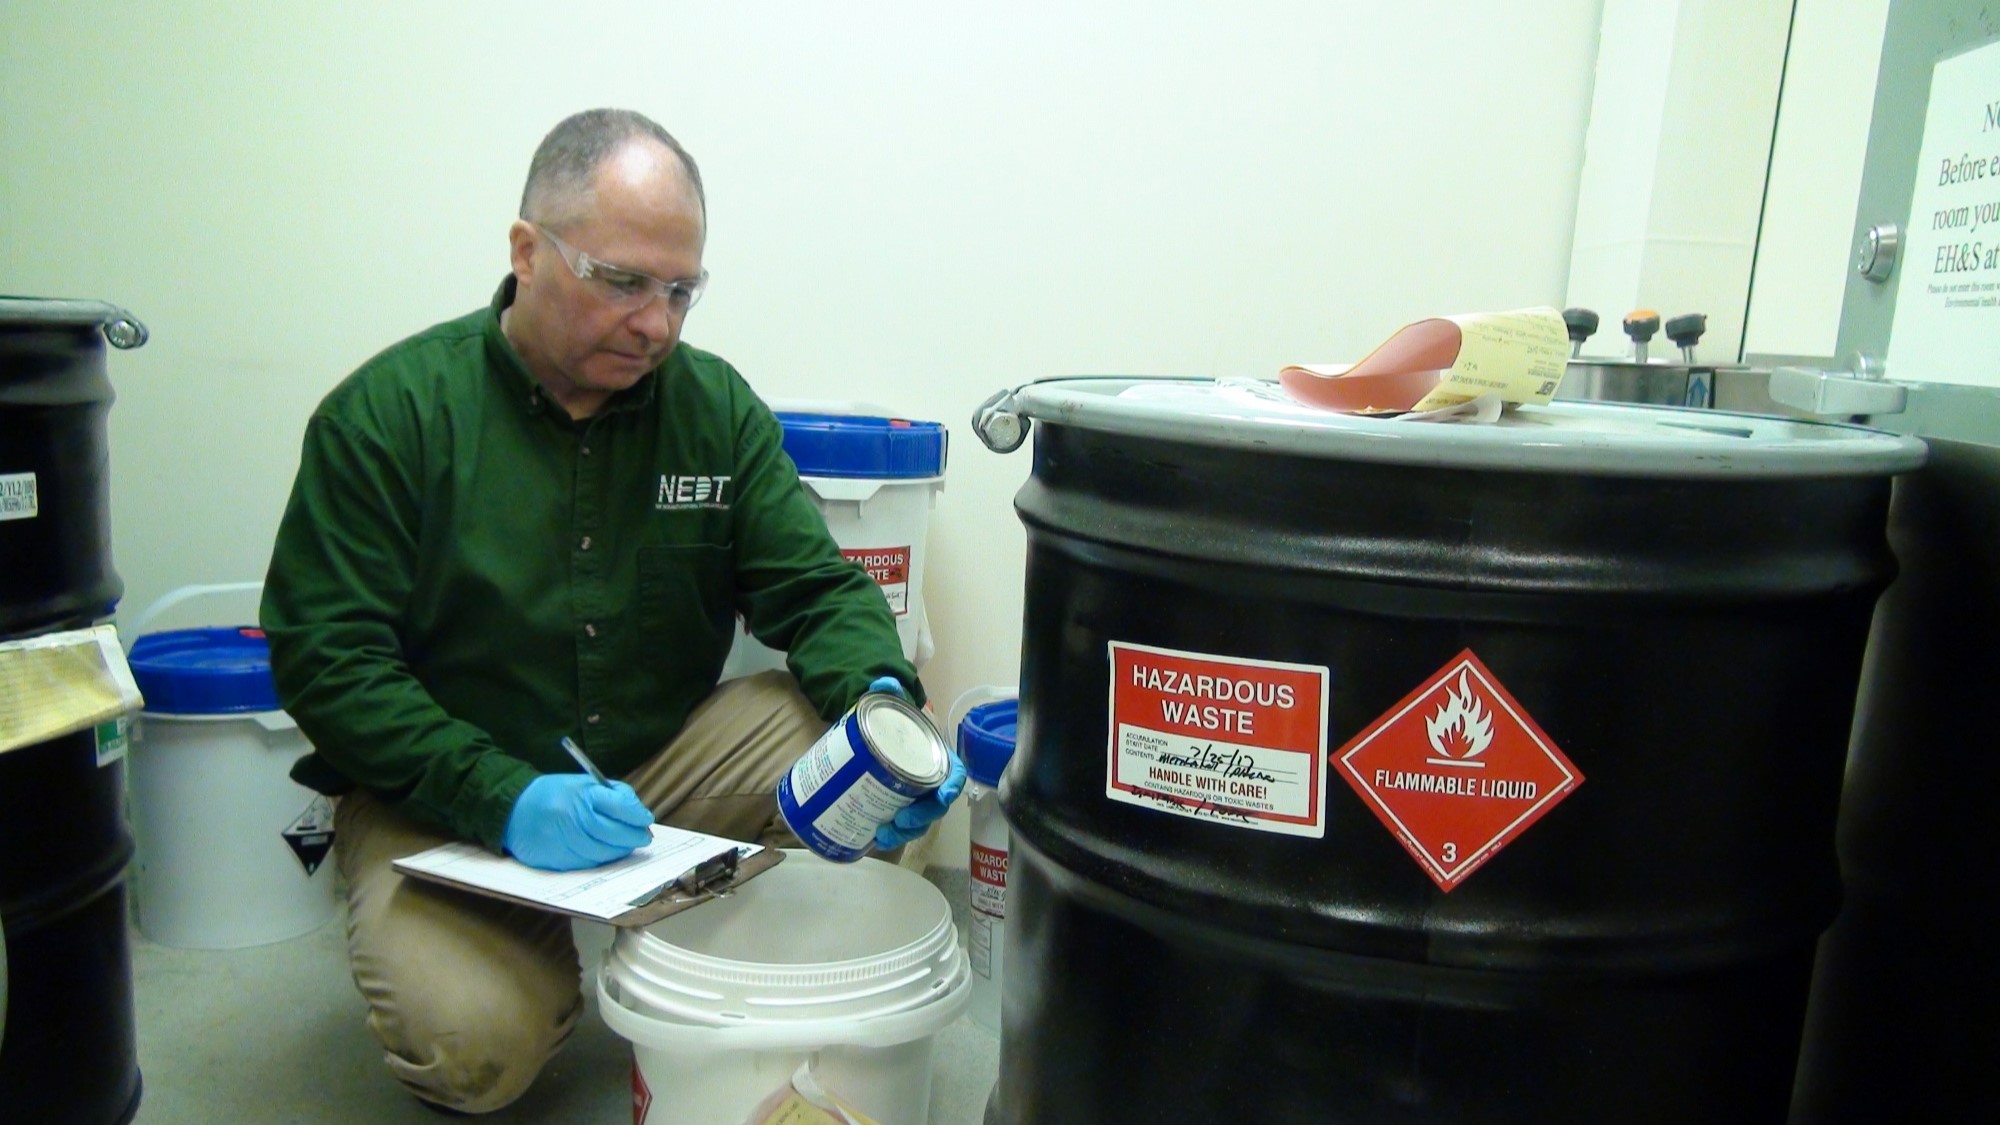 NEDT technician filling out hazardous waste forms for transportation and disposal.